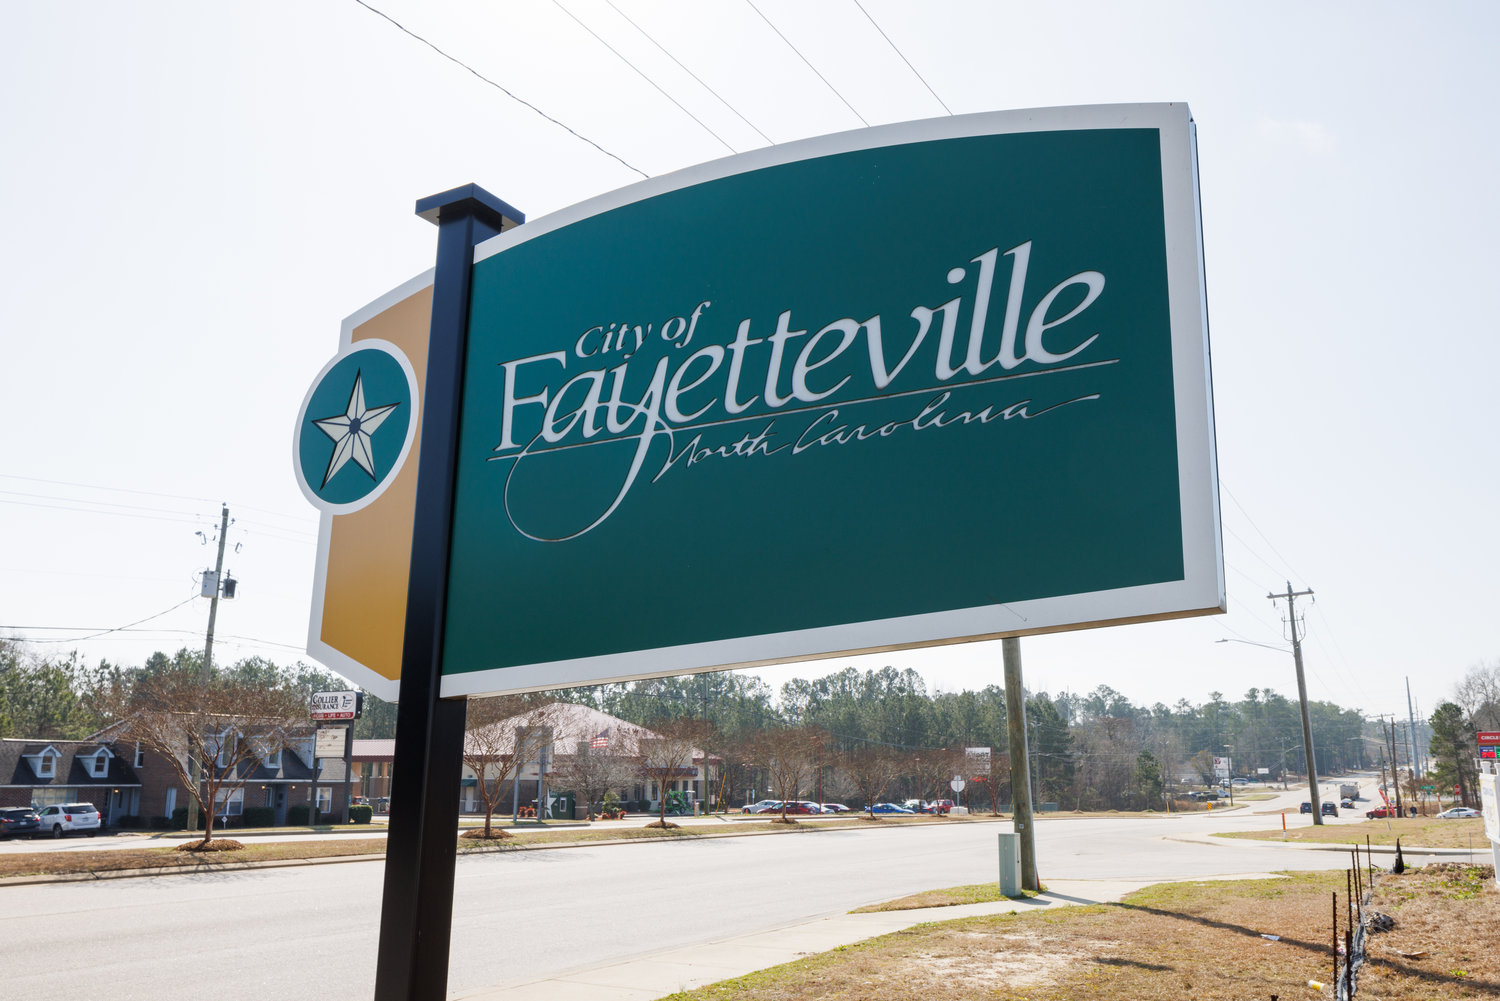 Only one councilman and three candidates responded to a questionnaire sent out by organizers of the Vote Yes Fayetteville initiative regarding changes to City Council seats.